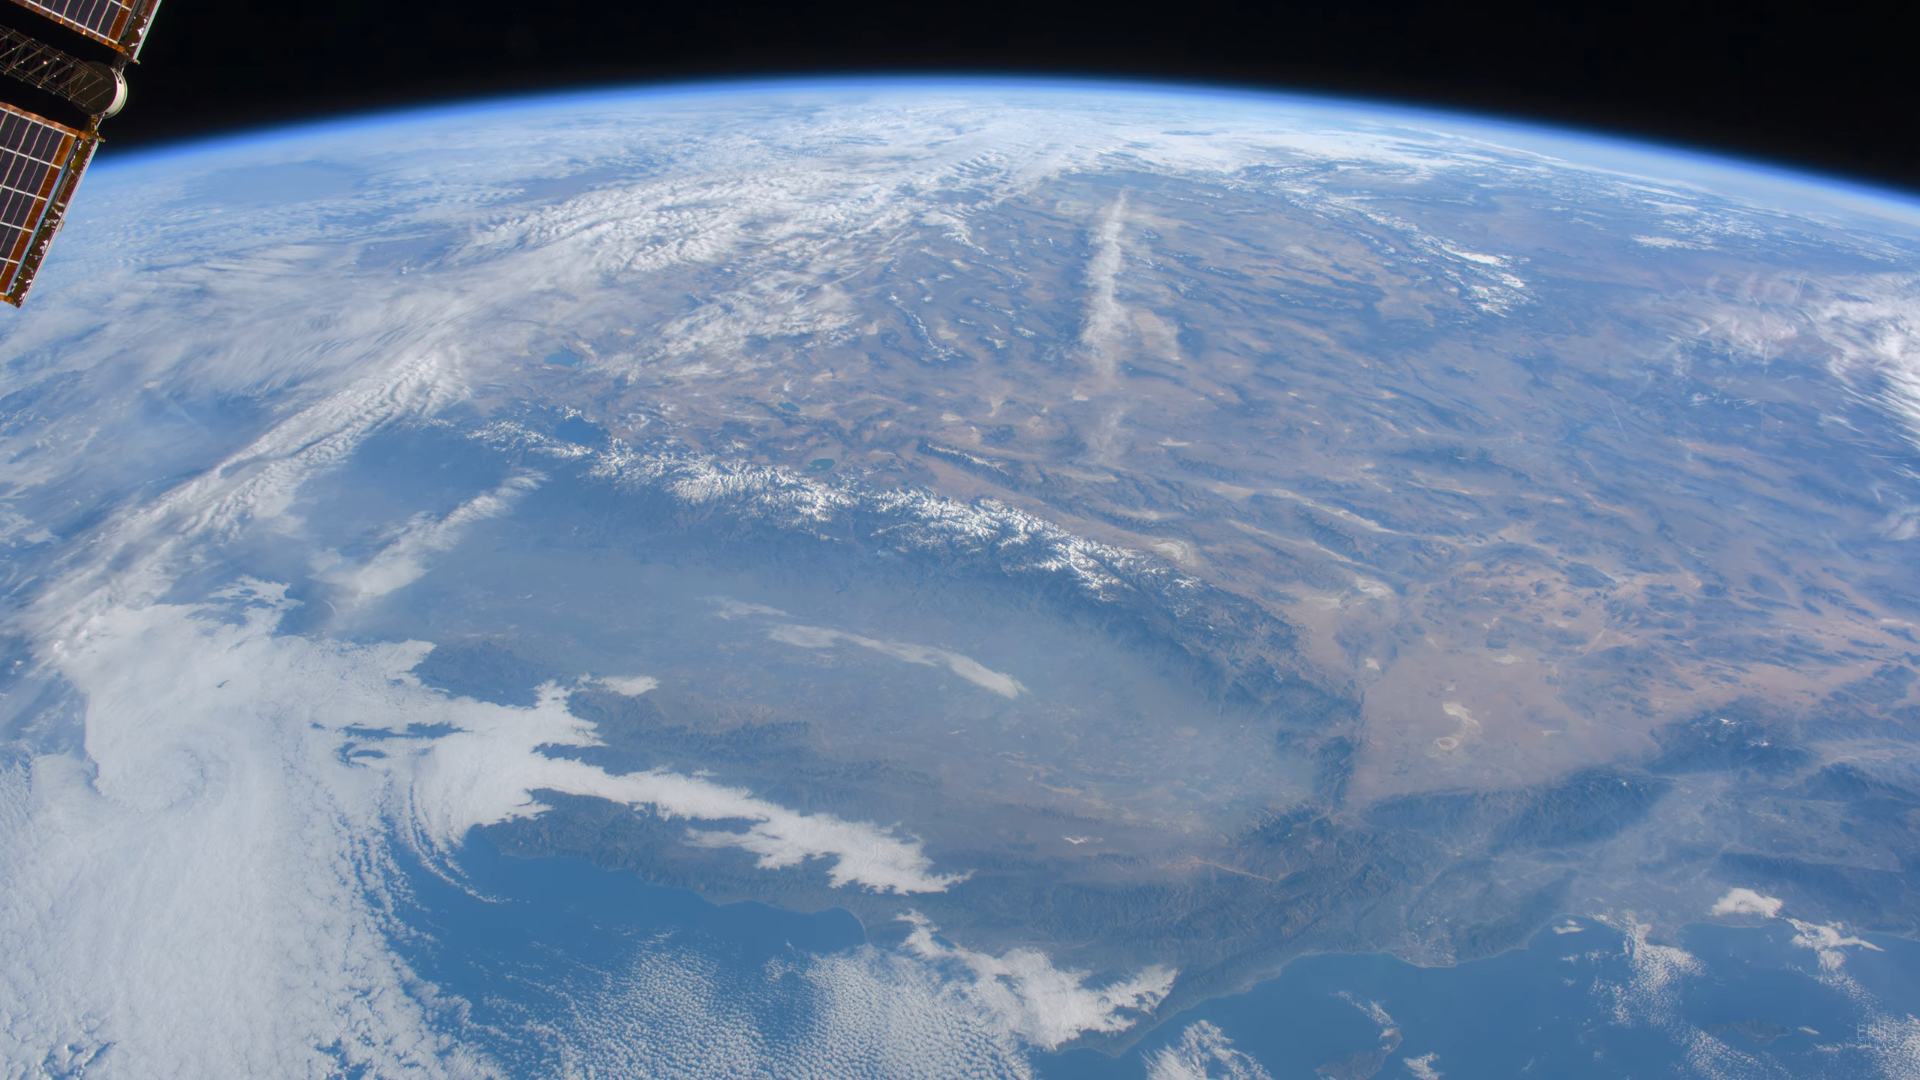 General 1920x1080 satellite satellite imagery NASA USA California clouds North America continents planet mountain chain mountains atmosphere ocean view solar panel space globes desert space station Los Angeles Las Vegas west coast